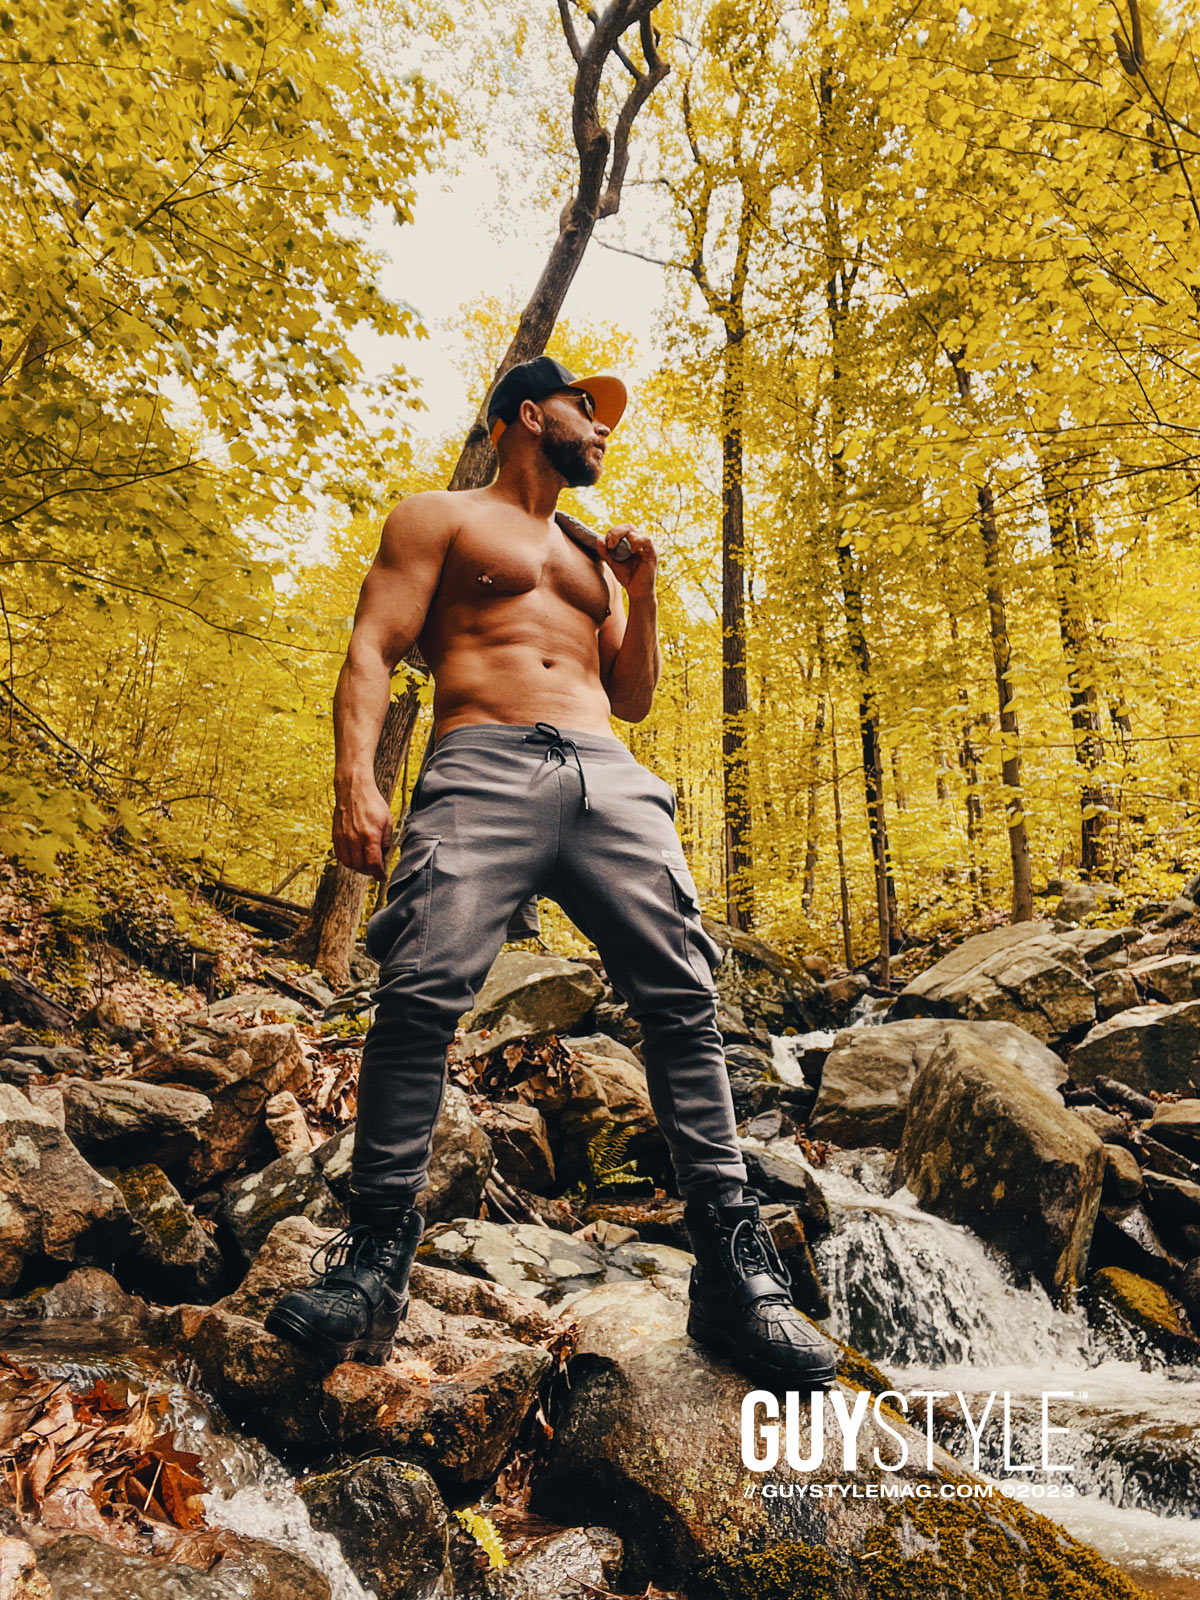 Hiking the Peaks and Valleys: A Bodybuilder's Journey in New York's Catskill Mountains – By Maxwell Alexander, Certified Bodybuilding and Sports Nutrition Coach – Presented by HARD SUPPS